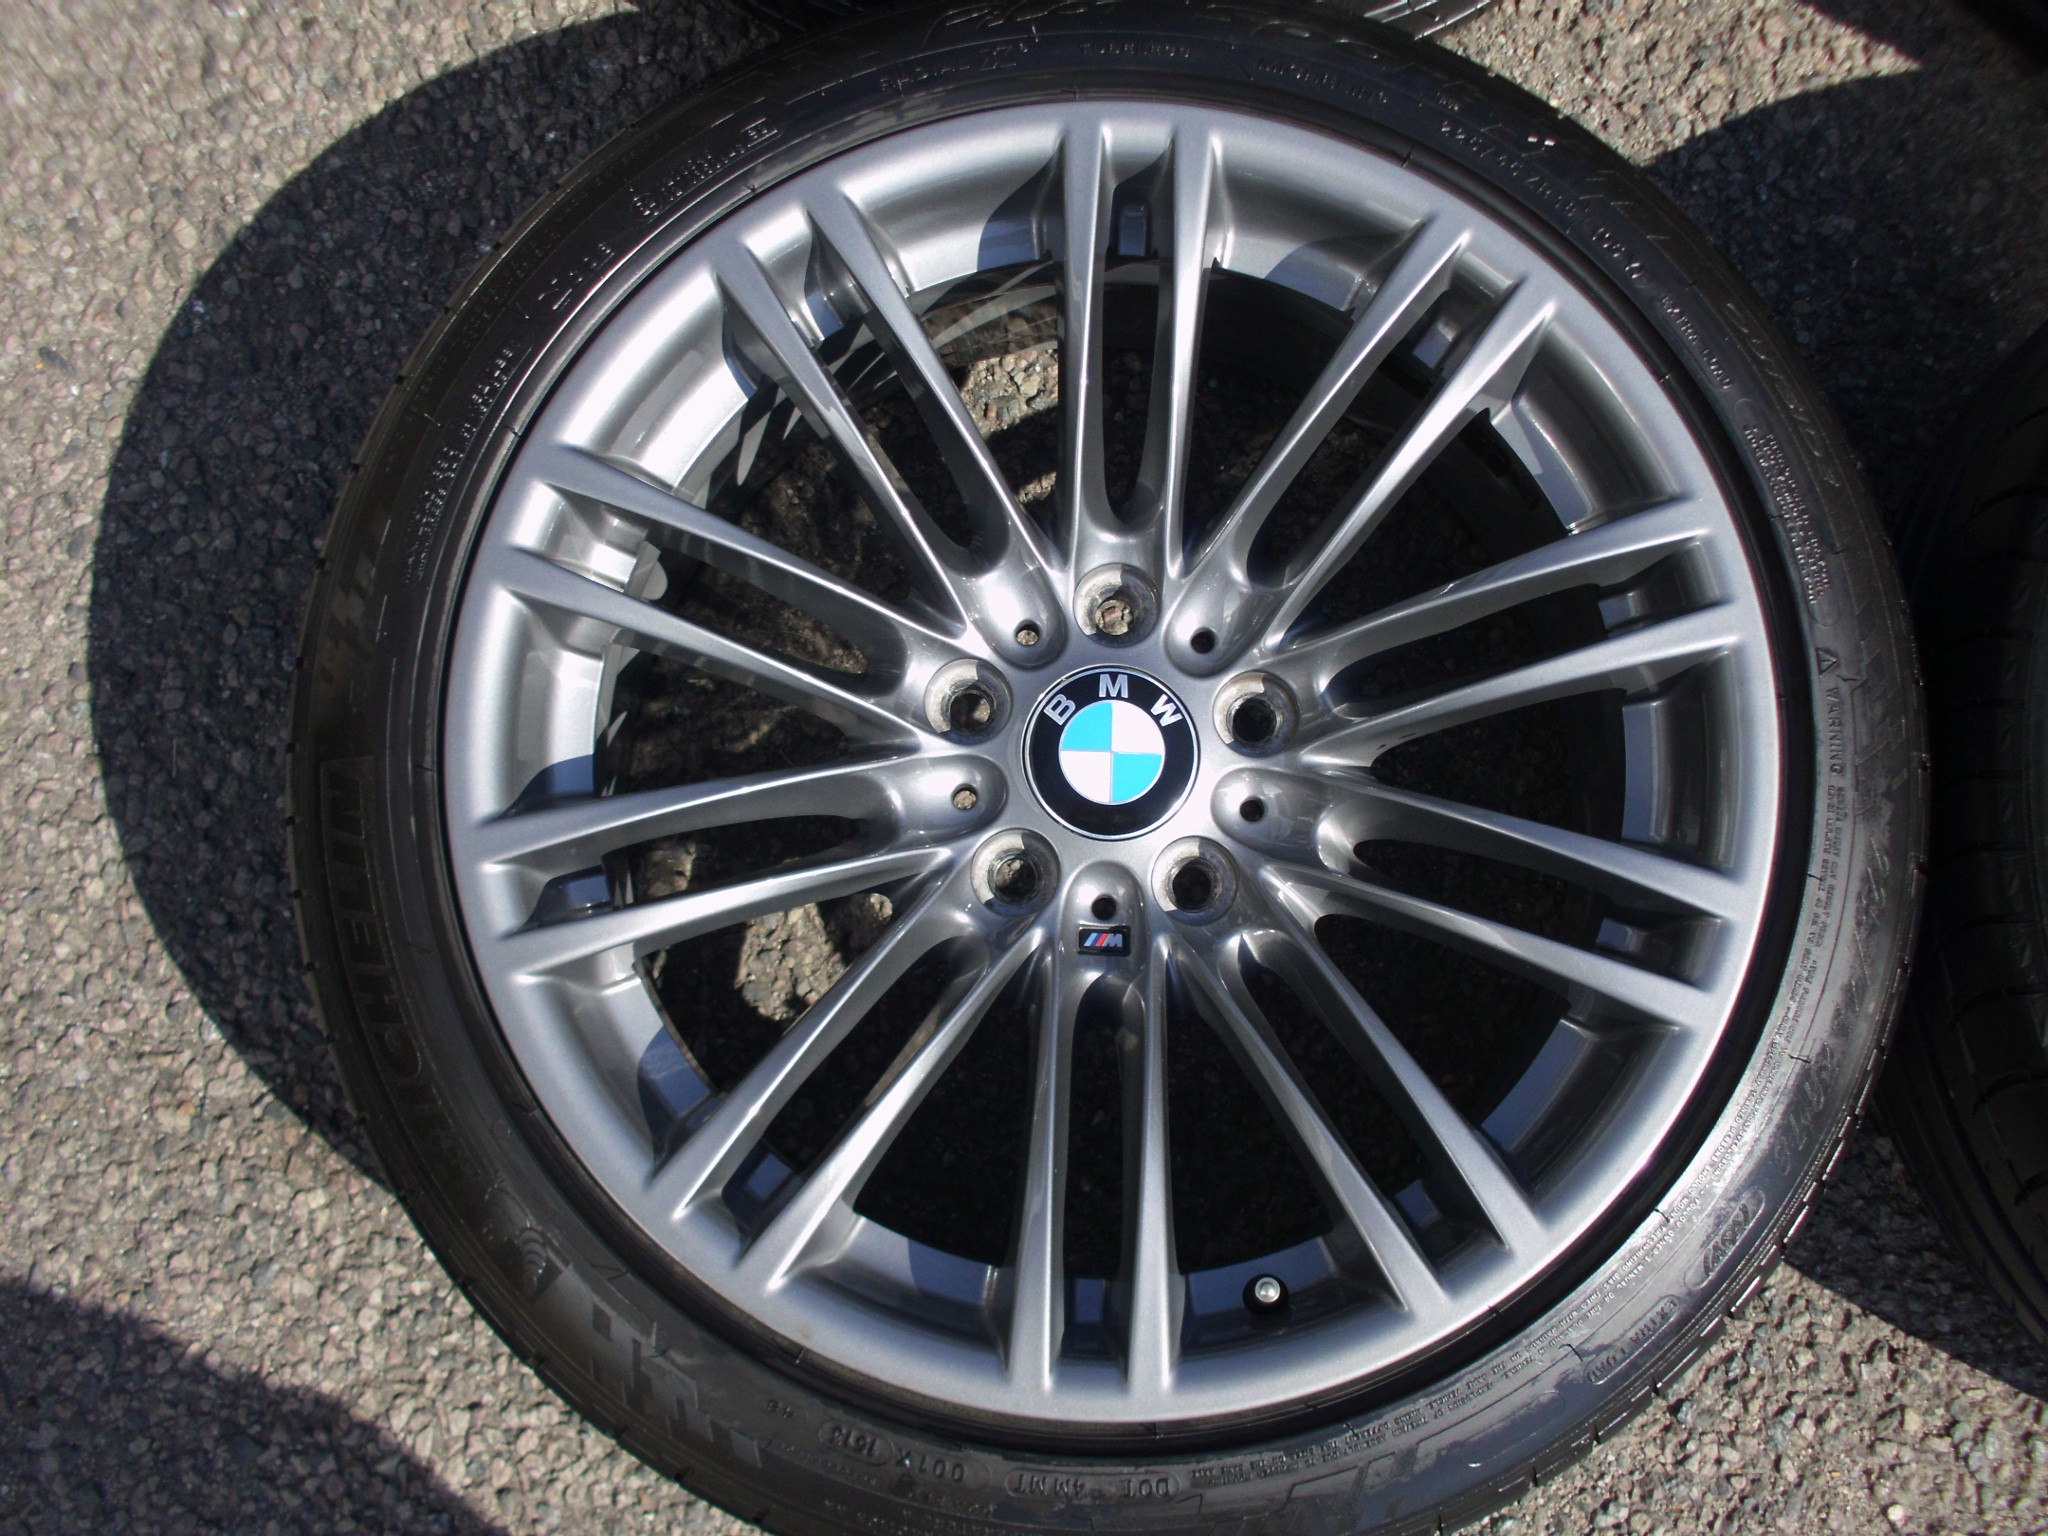 USED 18" GENUINE BMW STYLE 260 E92 M3 ALLOY WHEELS WITH DEEPER 9.5" REAR,NEAR UNMARKED,INC VG MICHELIN TYRES